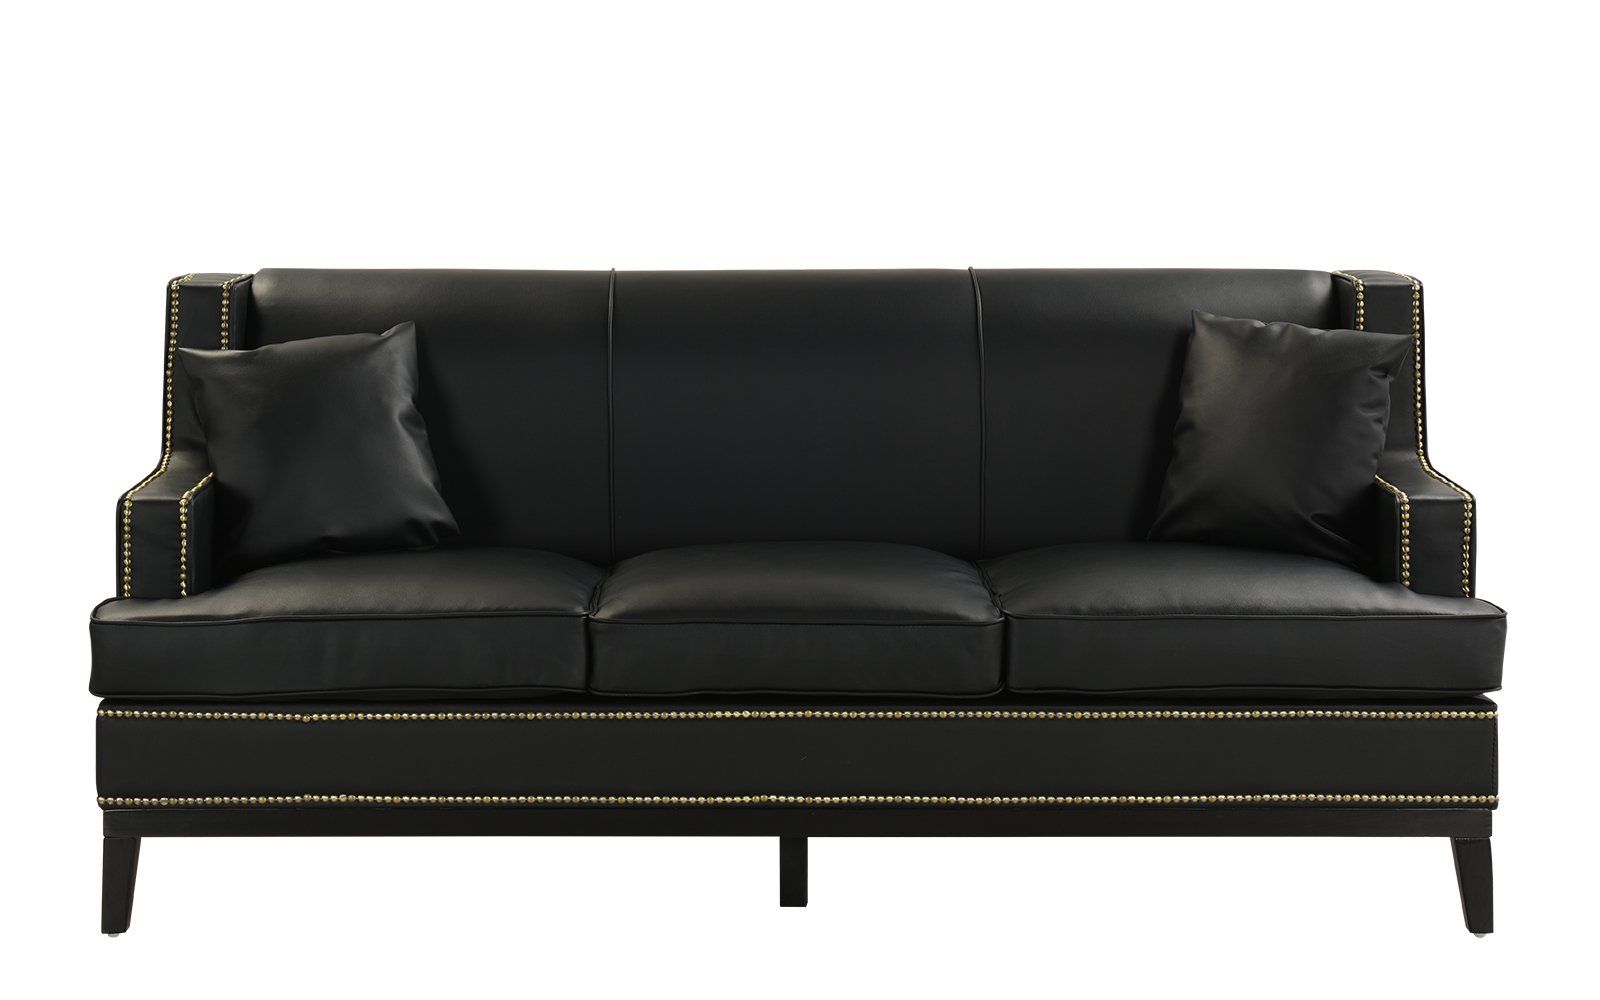 Black Modern Bonded Leather Sofa With Nailhead Trim Detail With Bonded Leather All In One Sectional Sofas With Ottoman And 2 Pillows Brown (View 14 of 15)